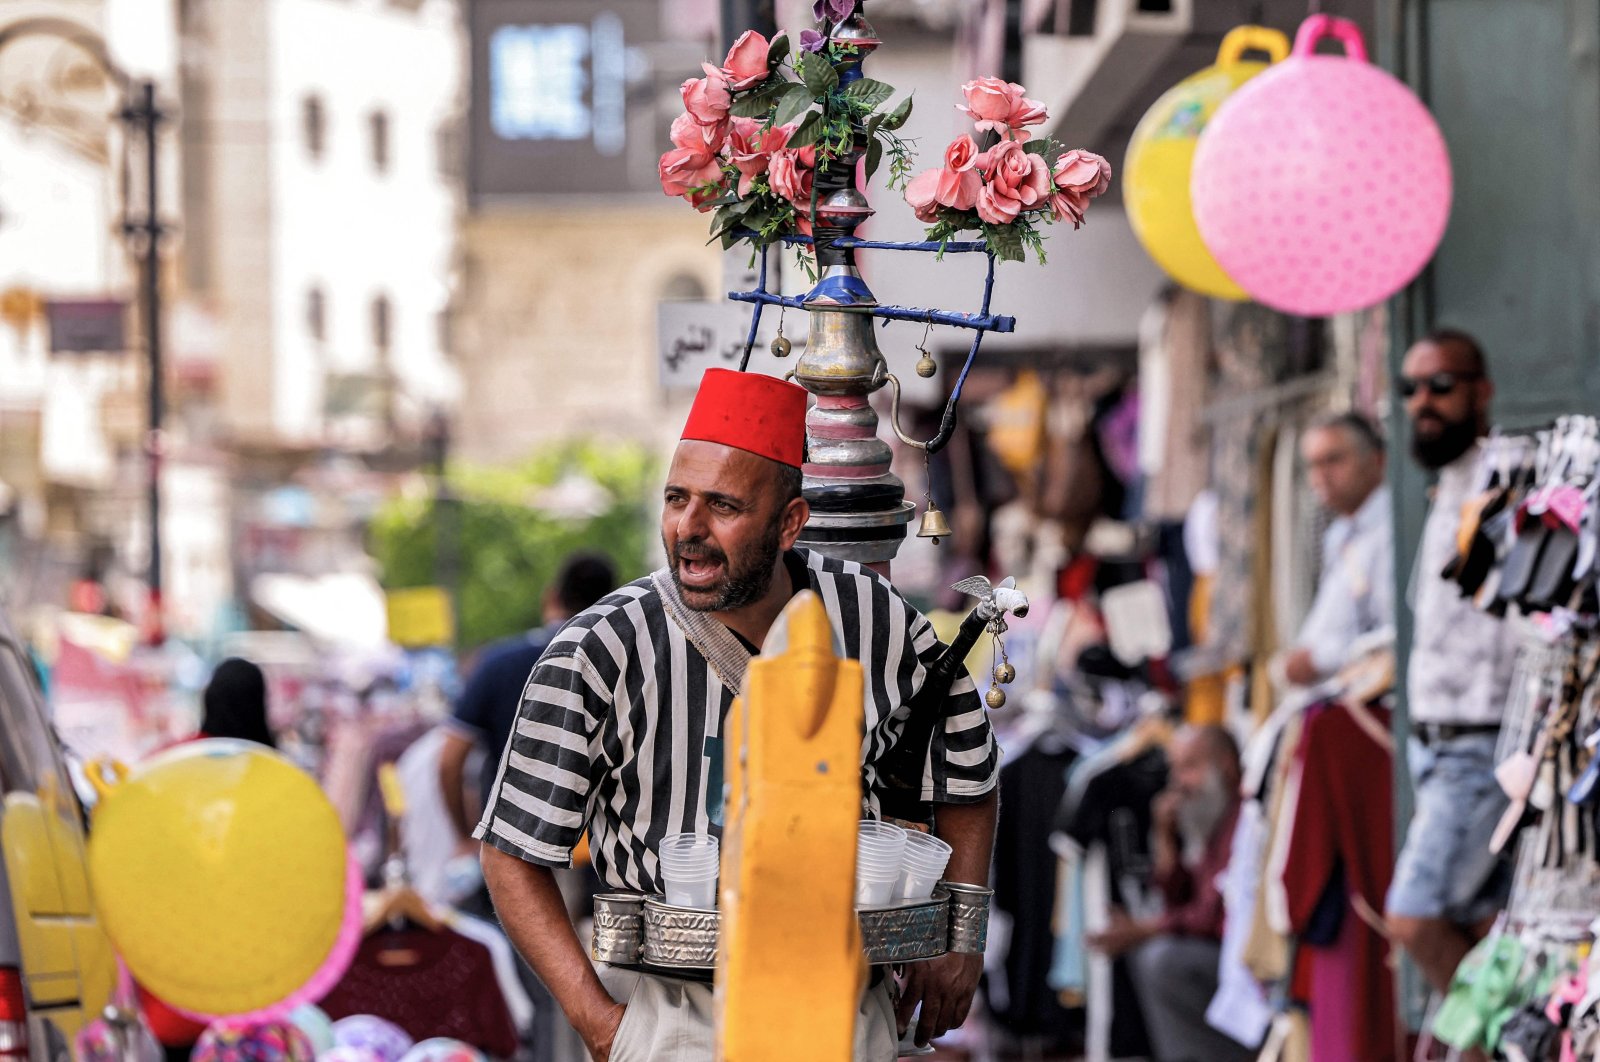 A Palestinian fresh juice street vendor calls for customers at a market in the old city of Bethlehem in the Israeli-occupied West Bank, Sept. 14, 2021. (AFP Photo)